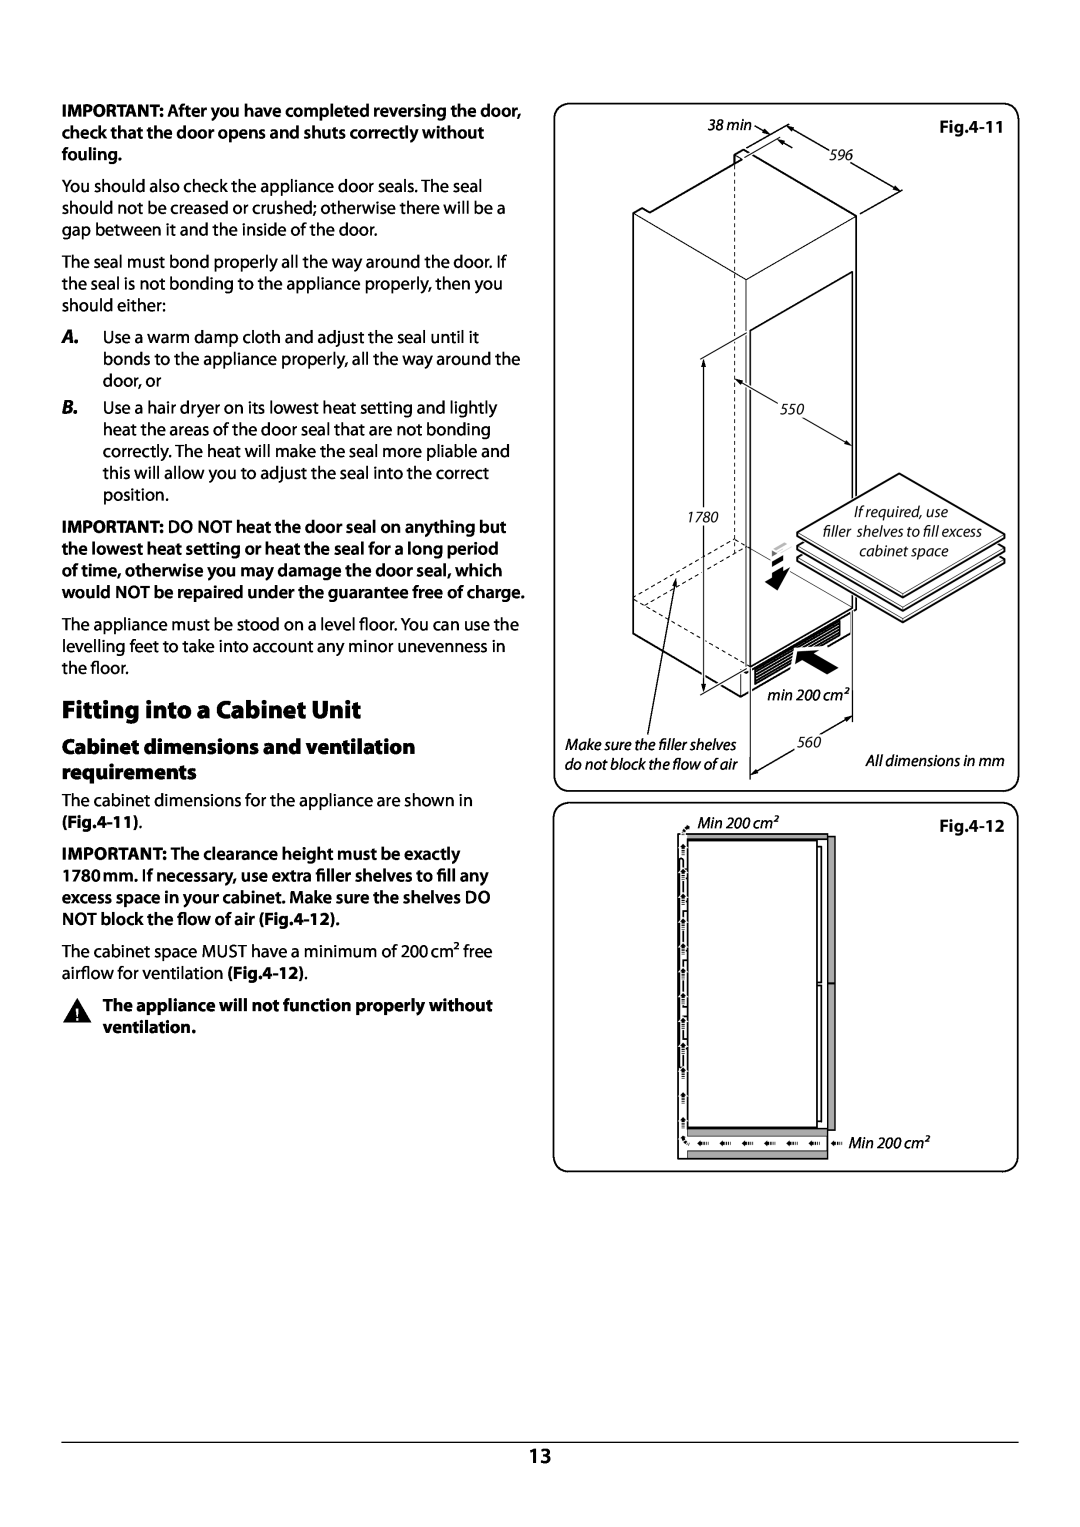 Rangemaster U110122-01B manual Fitting into a Cabinet Unit, Cabinet dimensions and ventilation requirements 